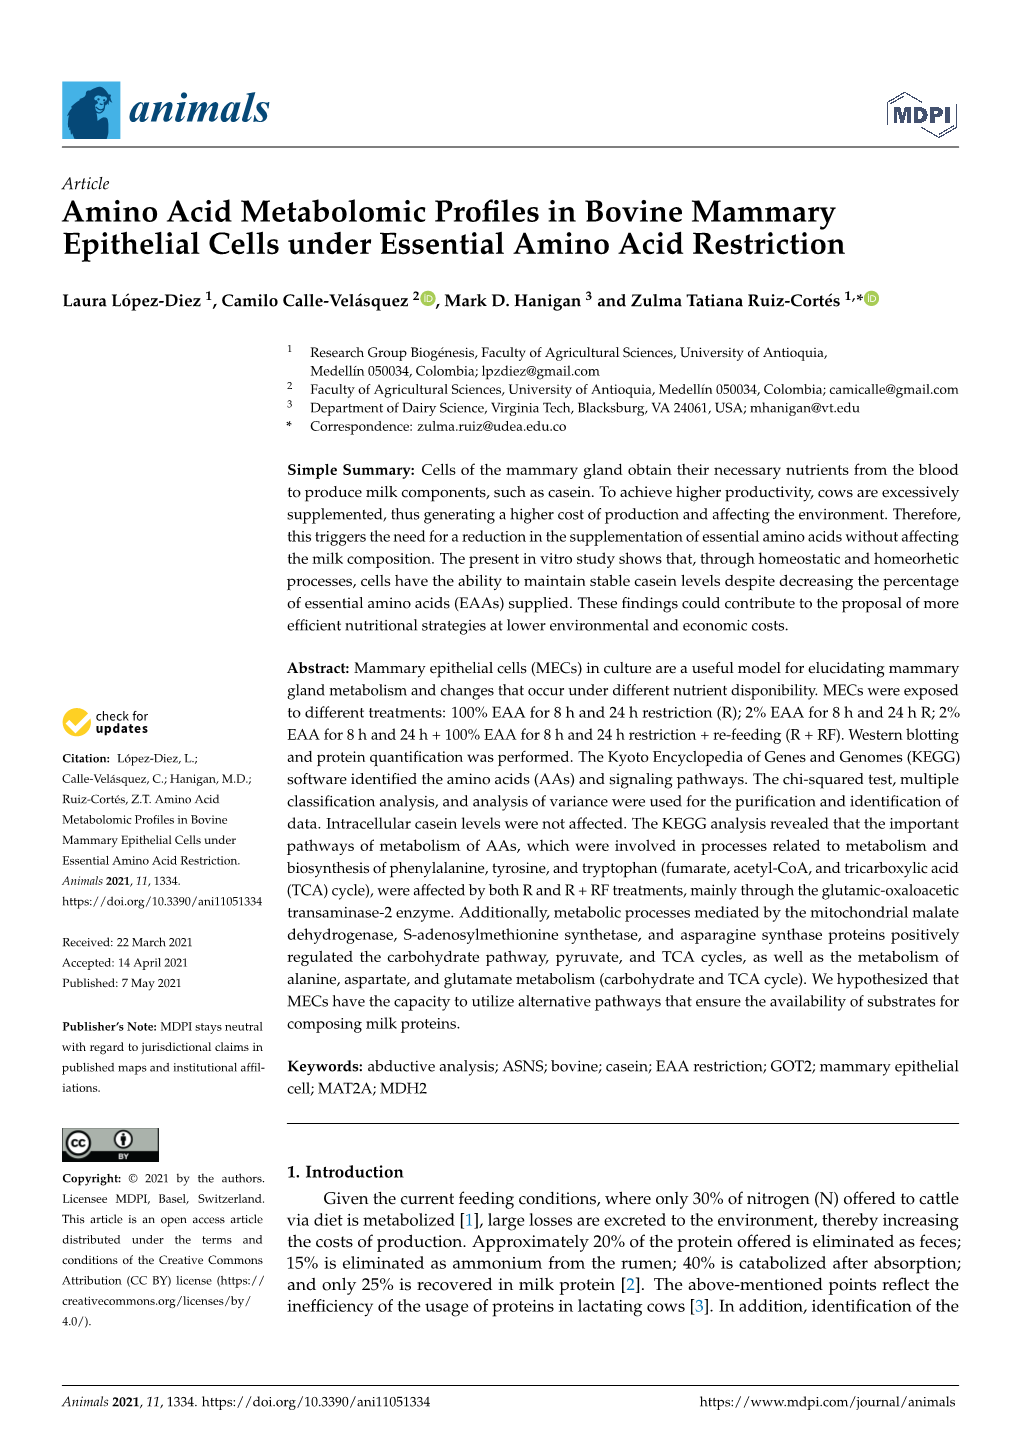 Amino Acid Metabolomic Profiles in Bovine Mammary Epithelial Cells Under Essential Amino Acid Restriction